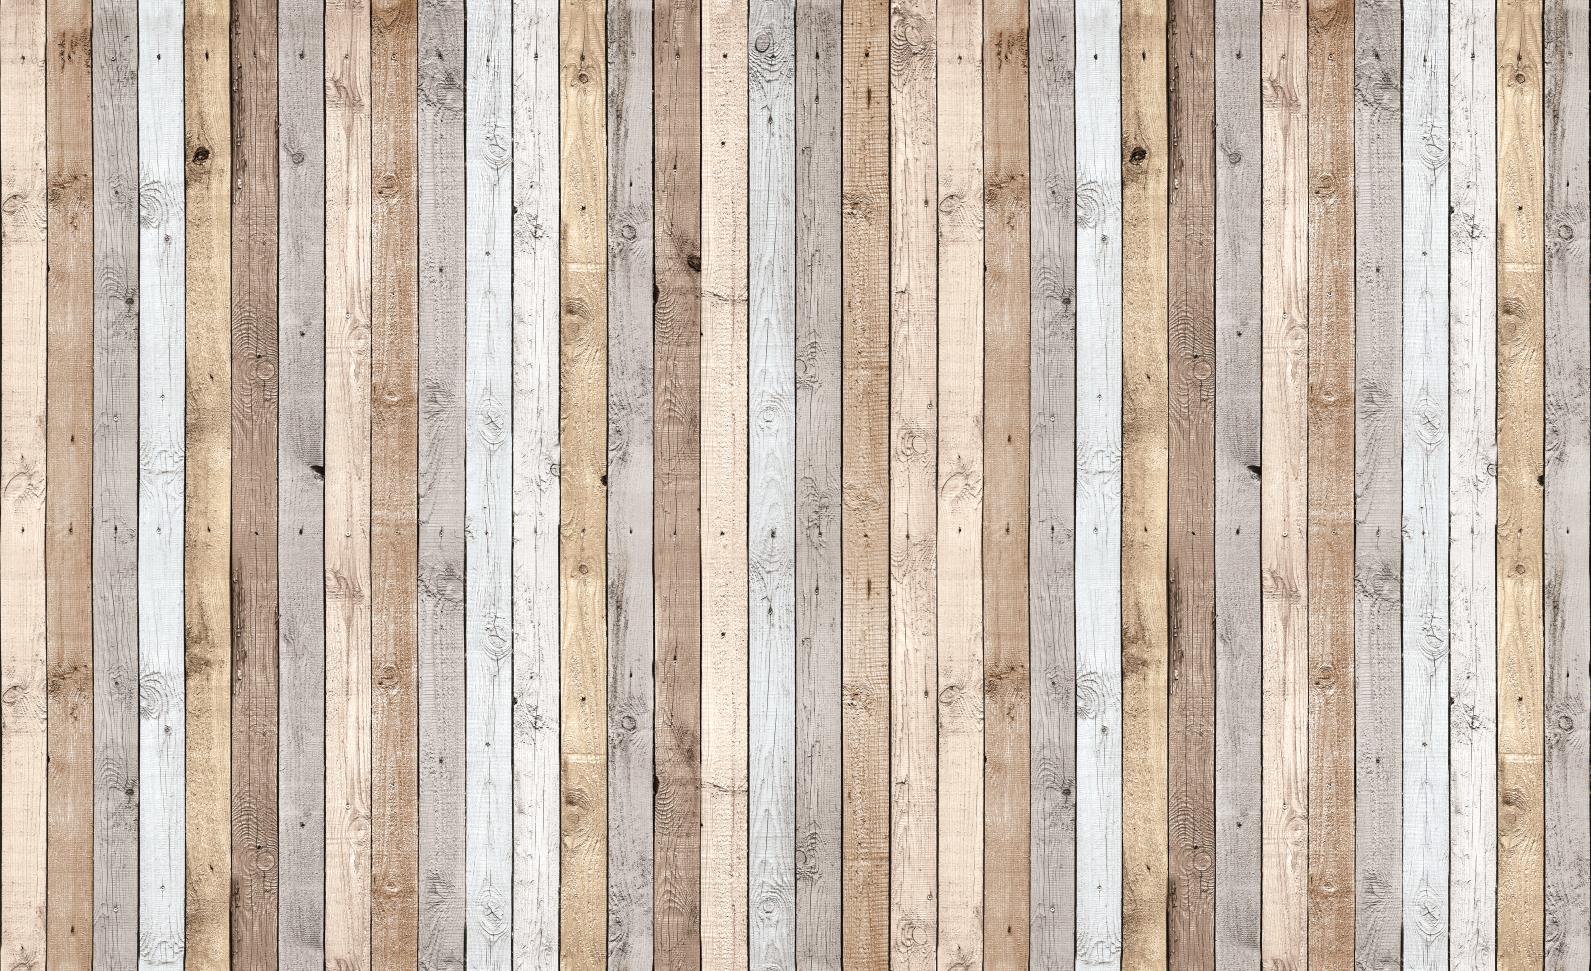 About Wood Planks Texture Photo Wallpaper Wall Mural Room 1036p